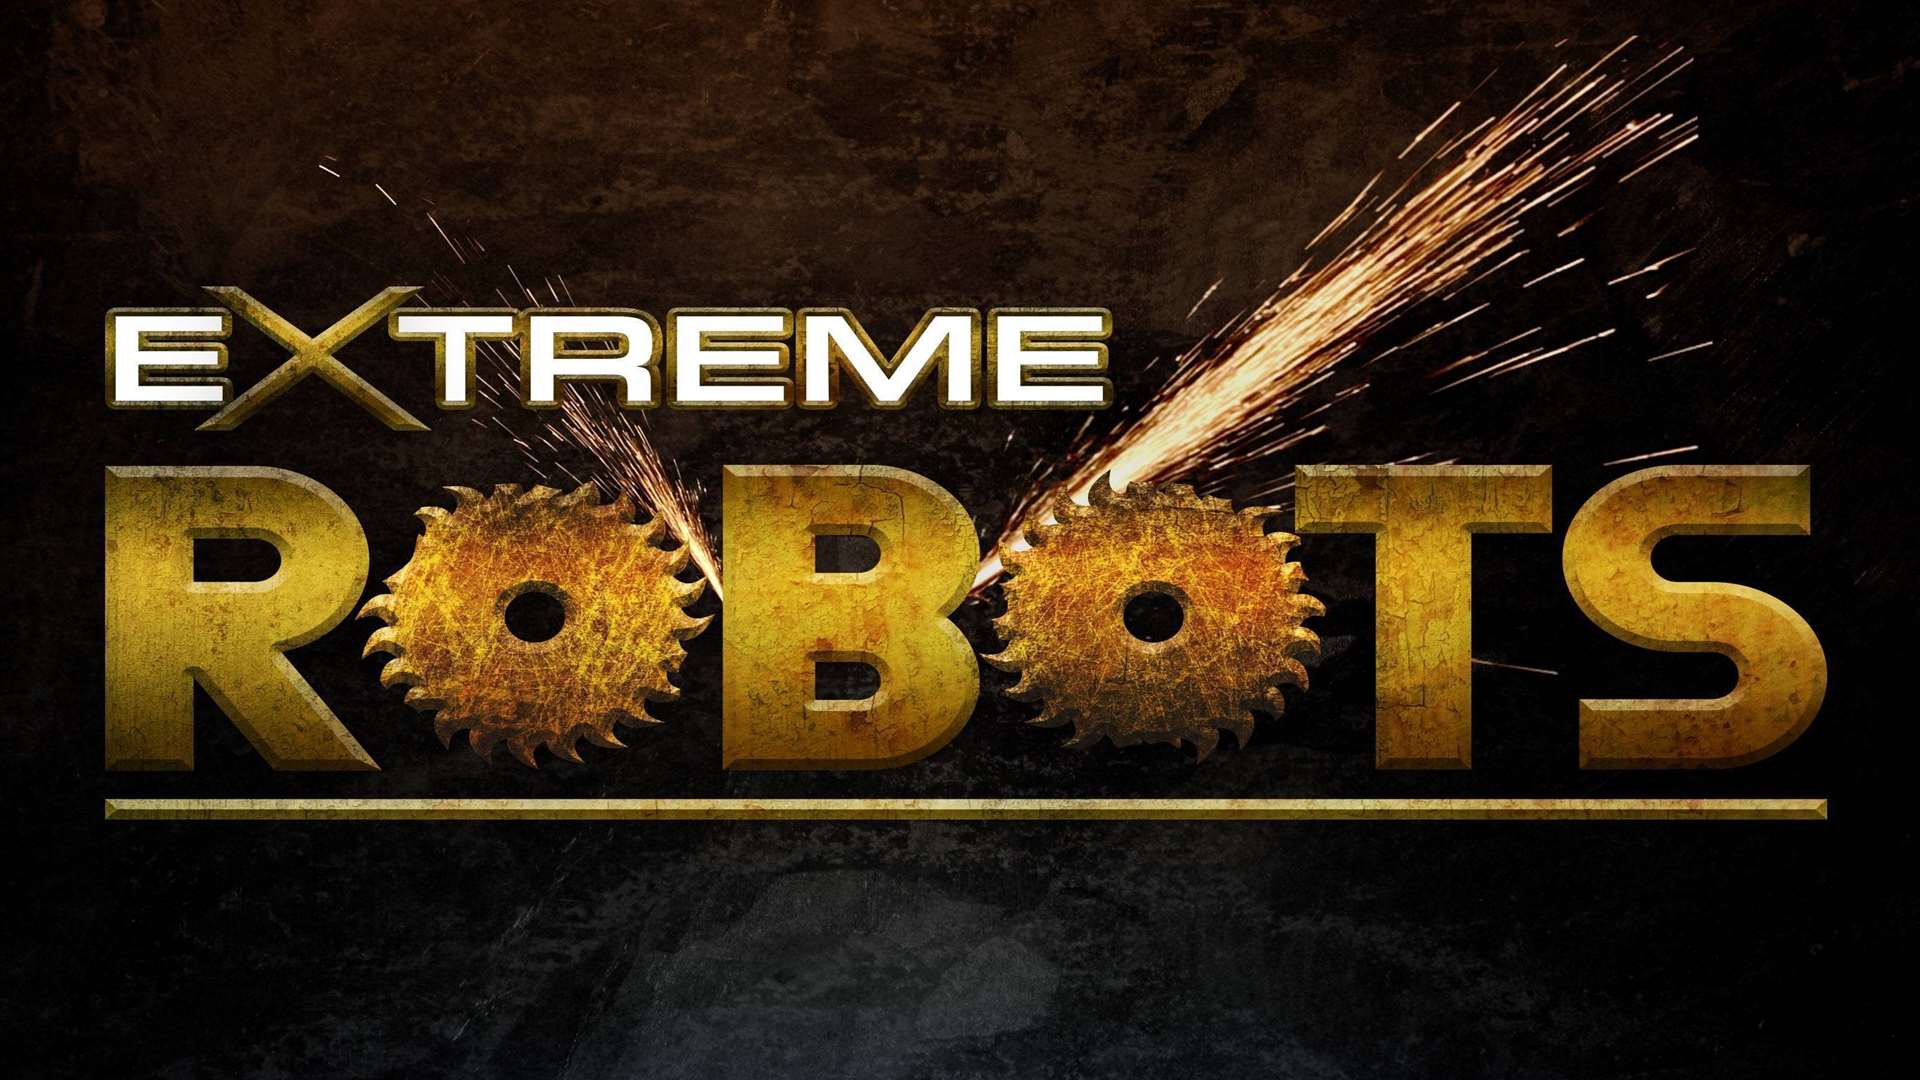 Extreme Robots, the roadshow, is coming to Medway and Maidstone